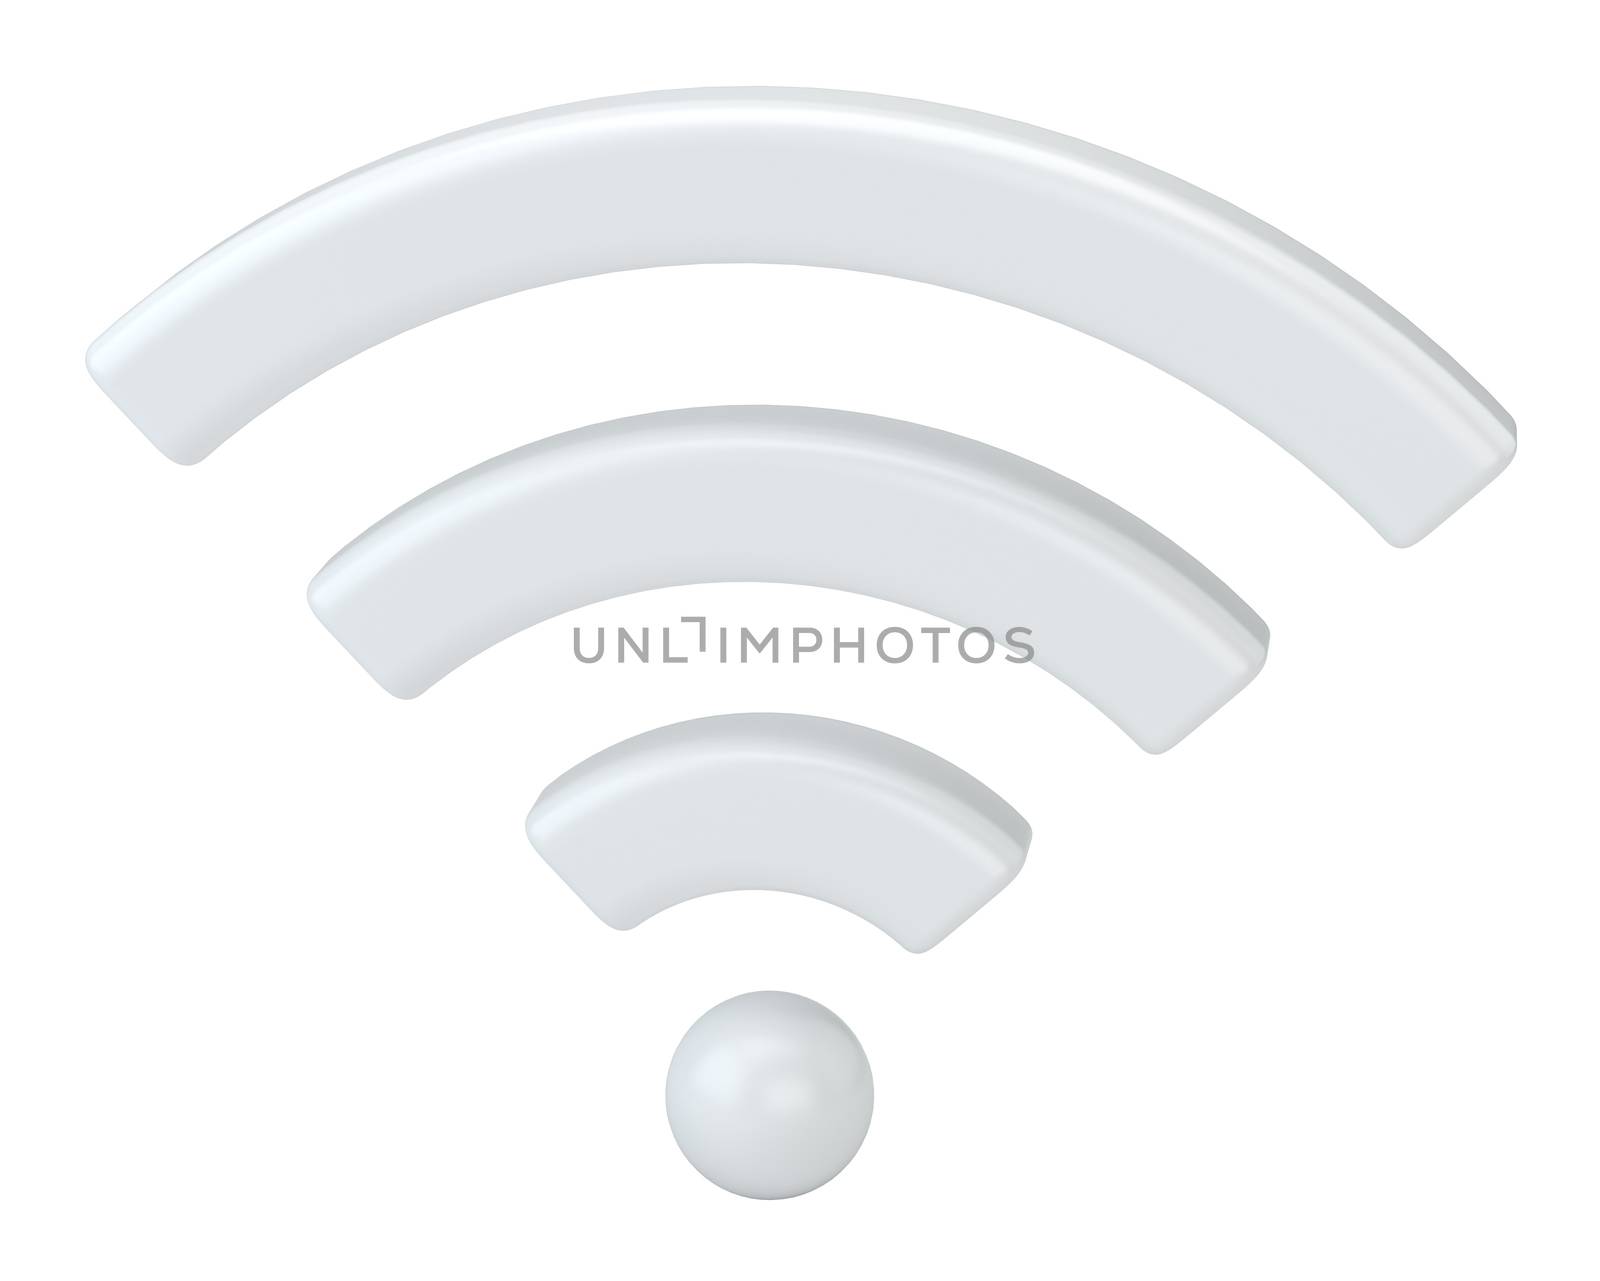 Wi Fi Wireless Network Symbol, 3d rendering Isolated on white background